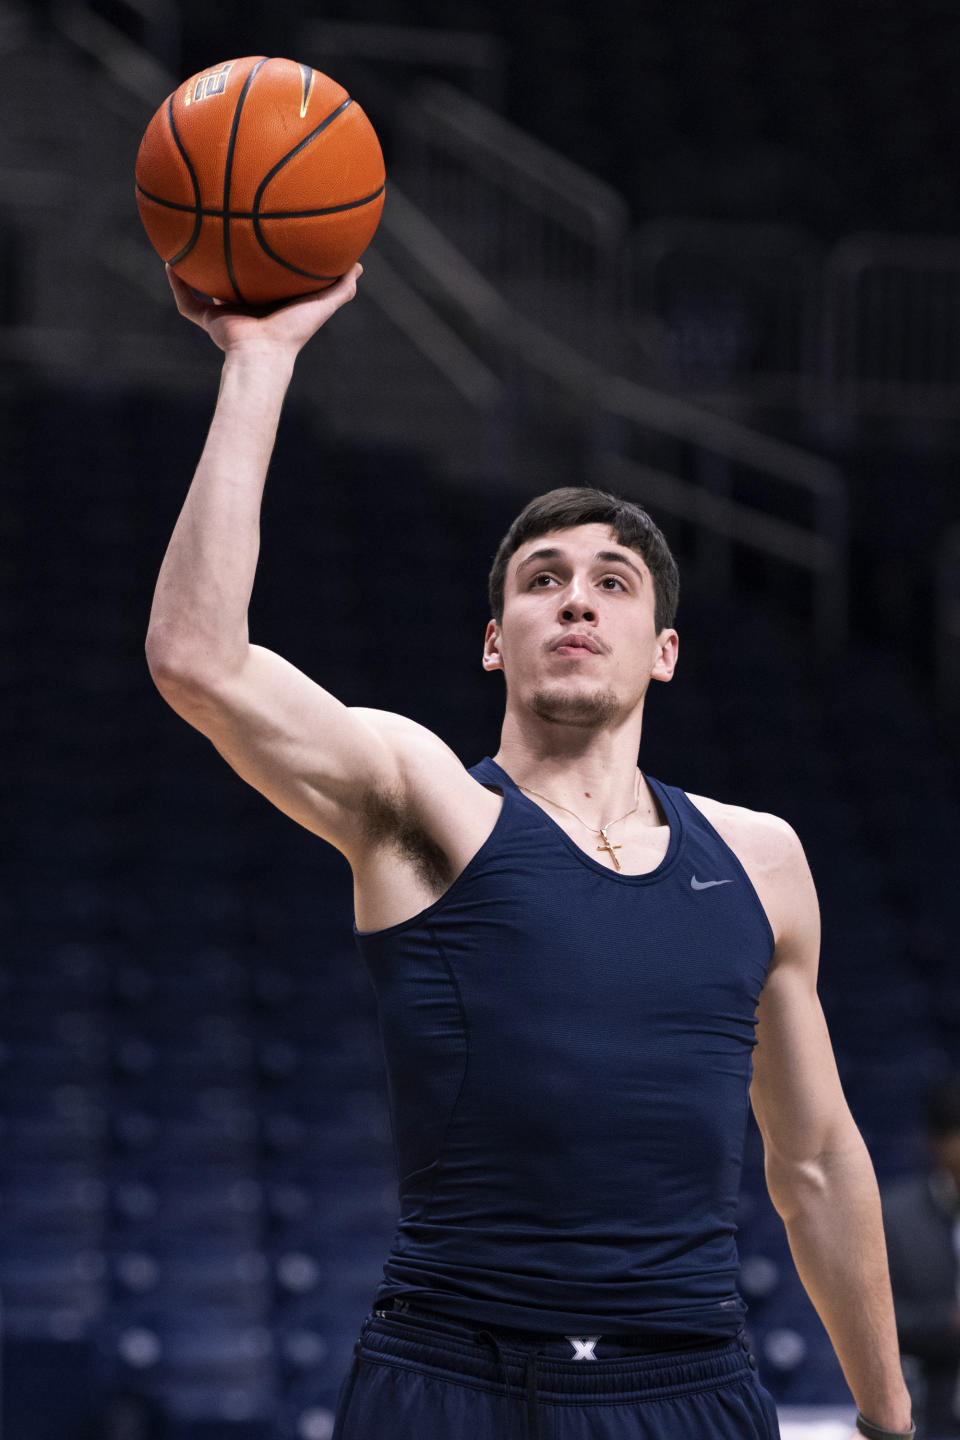 Xavier forward Zach Freemantle warms up for the team's NCAA college basketball game against Butler, Friday, Jan. 7, 2022, in Indianapolis. (AP Photo/Doug McSchooler)